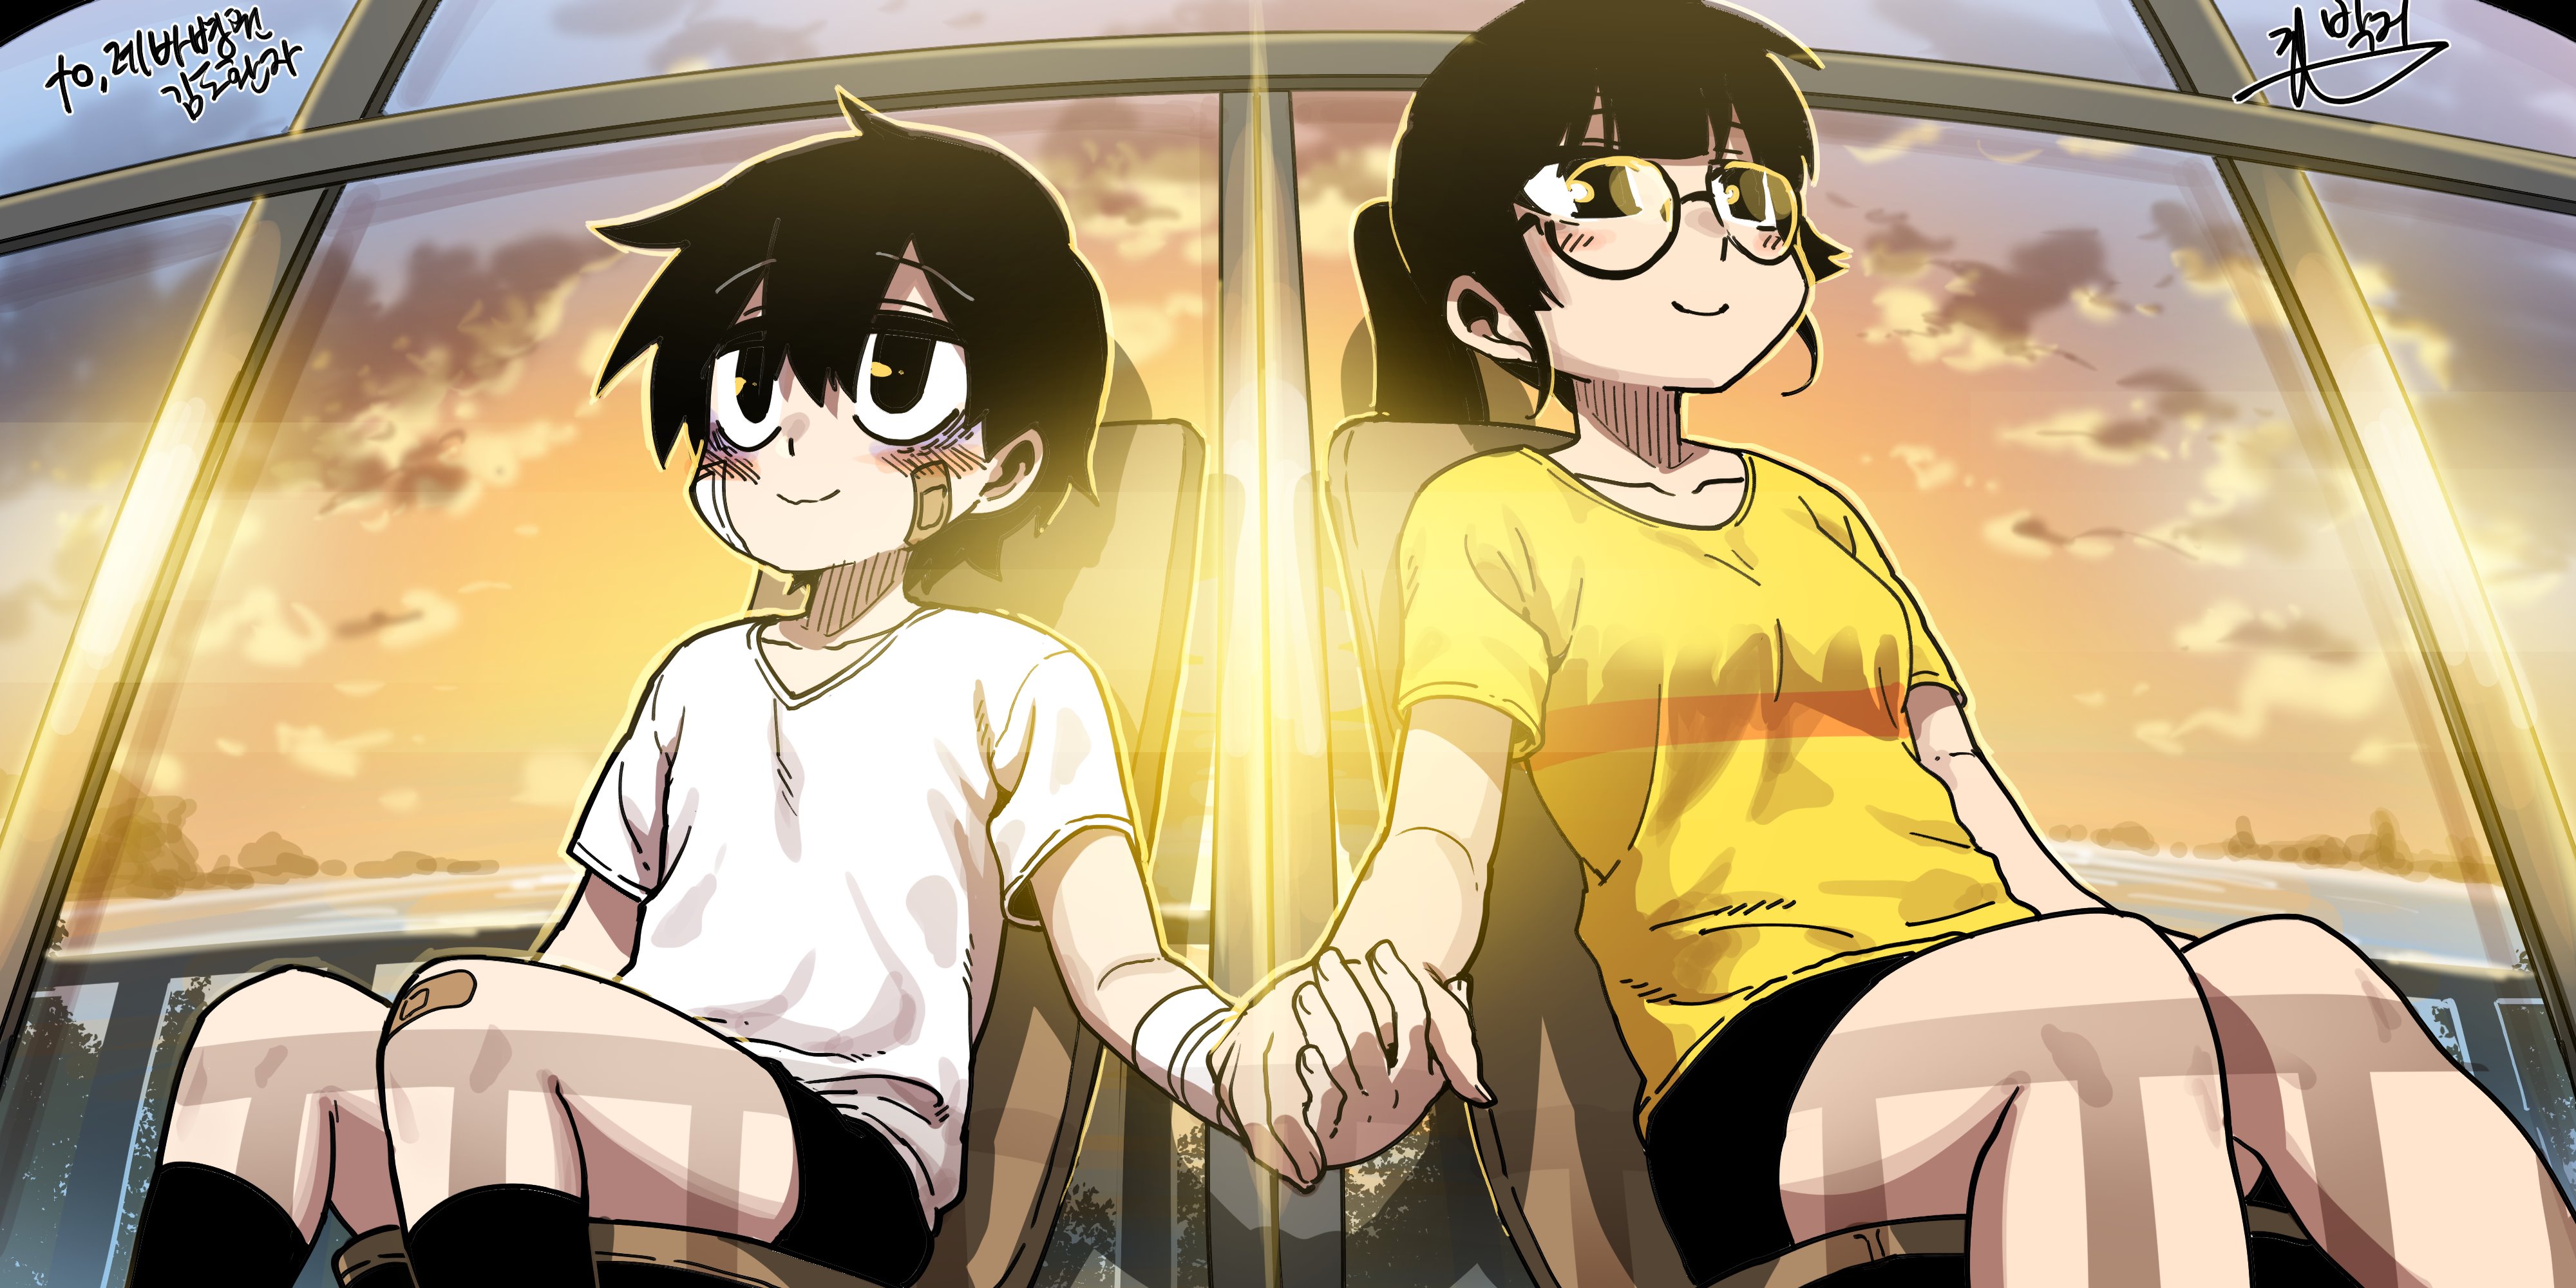 __lee_hoon_and_librarian_suicide_boy_drawn_by_parkgee__7997a758dc69170dba7473551482a339.jpg